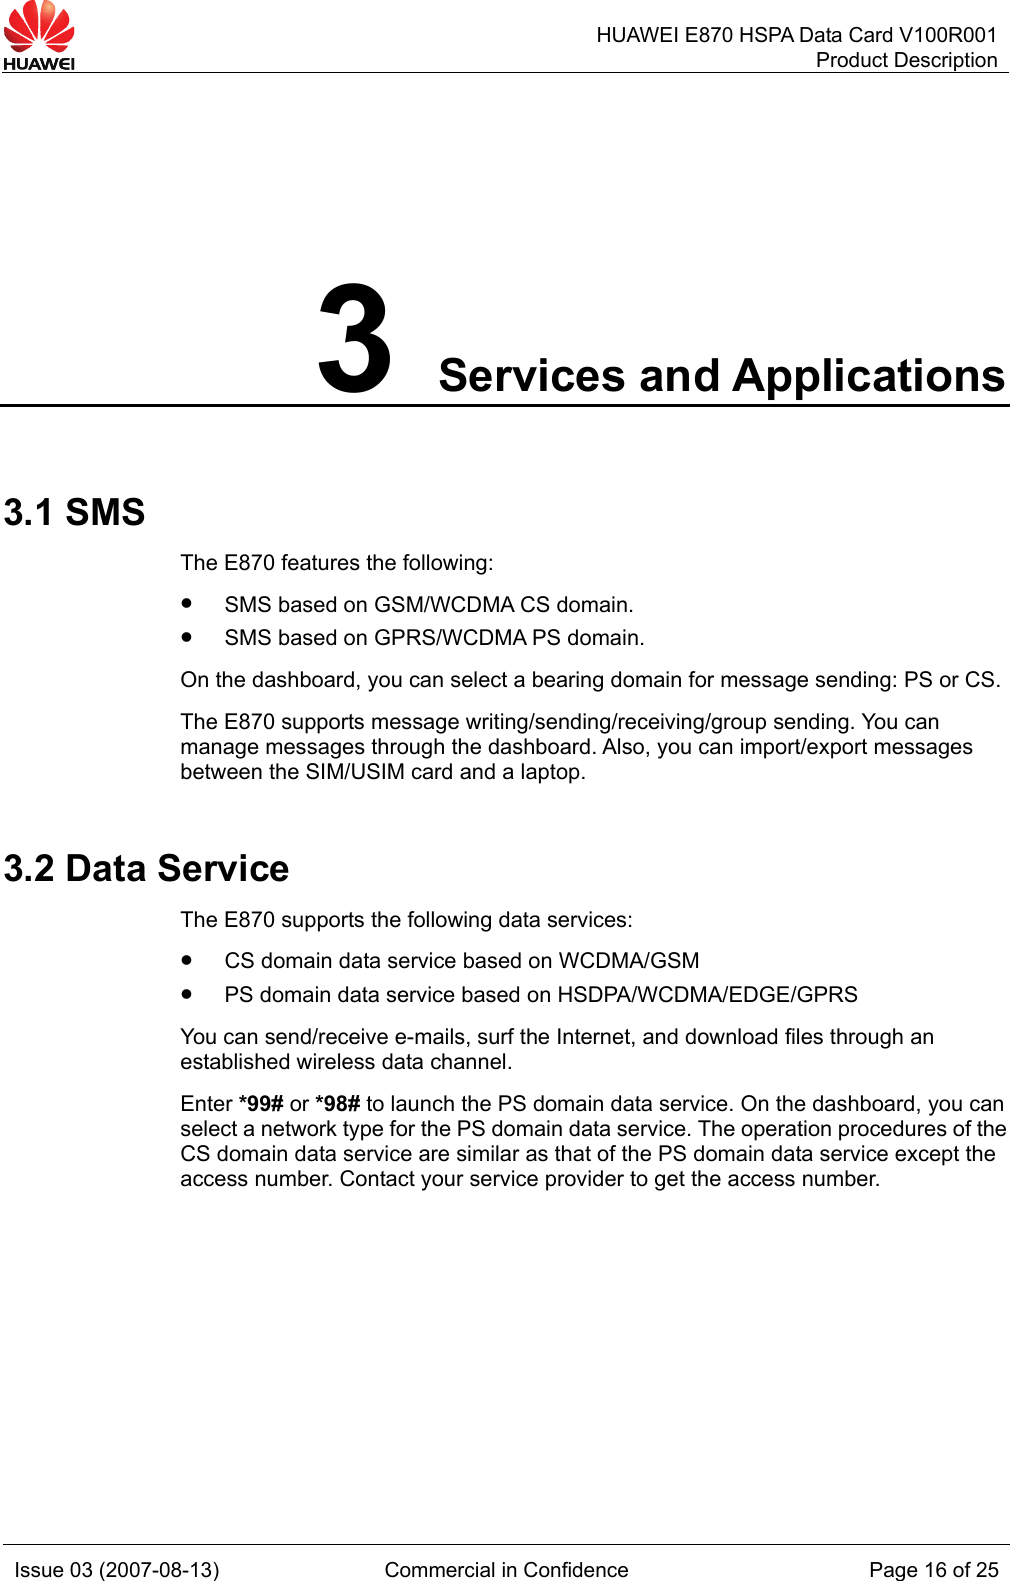   HUAWEI E870 HSPA Data Card V100R001Product Description Issue 03 (2007-08-13)  Commercial in Confidence  Page 16 of 25 3 Services and Applications 3.1 SMS The E870 features the following: z SMS based on GSM/WCDMA CS domain. z SMS based on GPRS/WCDMA PS domain. On the dashboard, you can select a bearing domain for message sending: PS or CS. The E870 supports message writing/sending/receiving/group sending. You can manage messages through the dashboard. Also, you can import/export messages between the SIM/USIM card and a laptop. 3.2 Data Service The E870 supports the following data services: z CS domain data service based on WCDMA/GSM z PS domain data service based on HSDPA/WCDMA/EDGE/GPRS You can send/receive e-mails, surf the Internet, and download files through an established wireless data channel. Enter *99# or *98# to launch the PS domain data service. On the dashboard, you can select a network type for the PS domain data service. The operation procedures of the CS domain data service are similar as that of the PS domain data service except the access number. Contact your service provider to get the access number.  